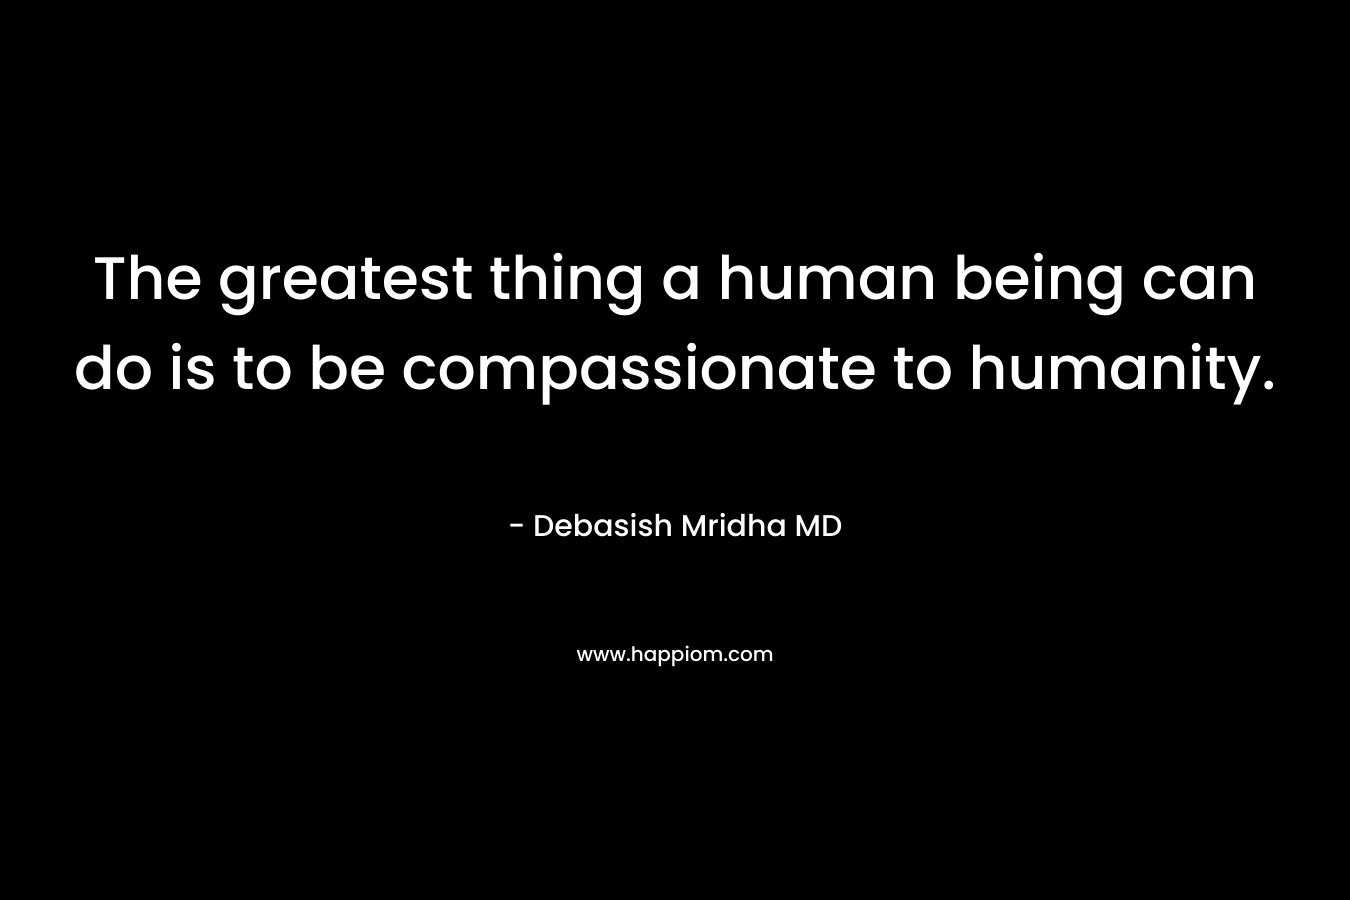 The greatest thing a human being can do is to be compassionate to humanity.